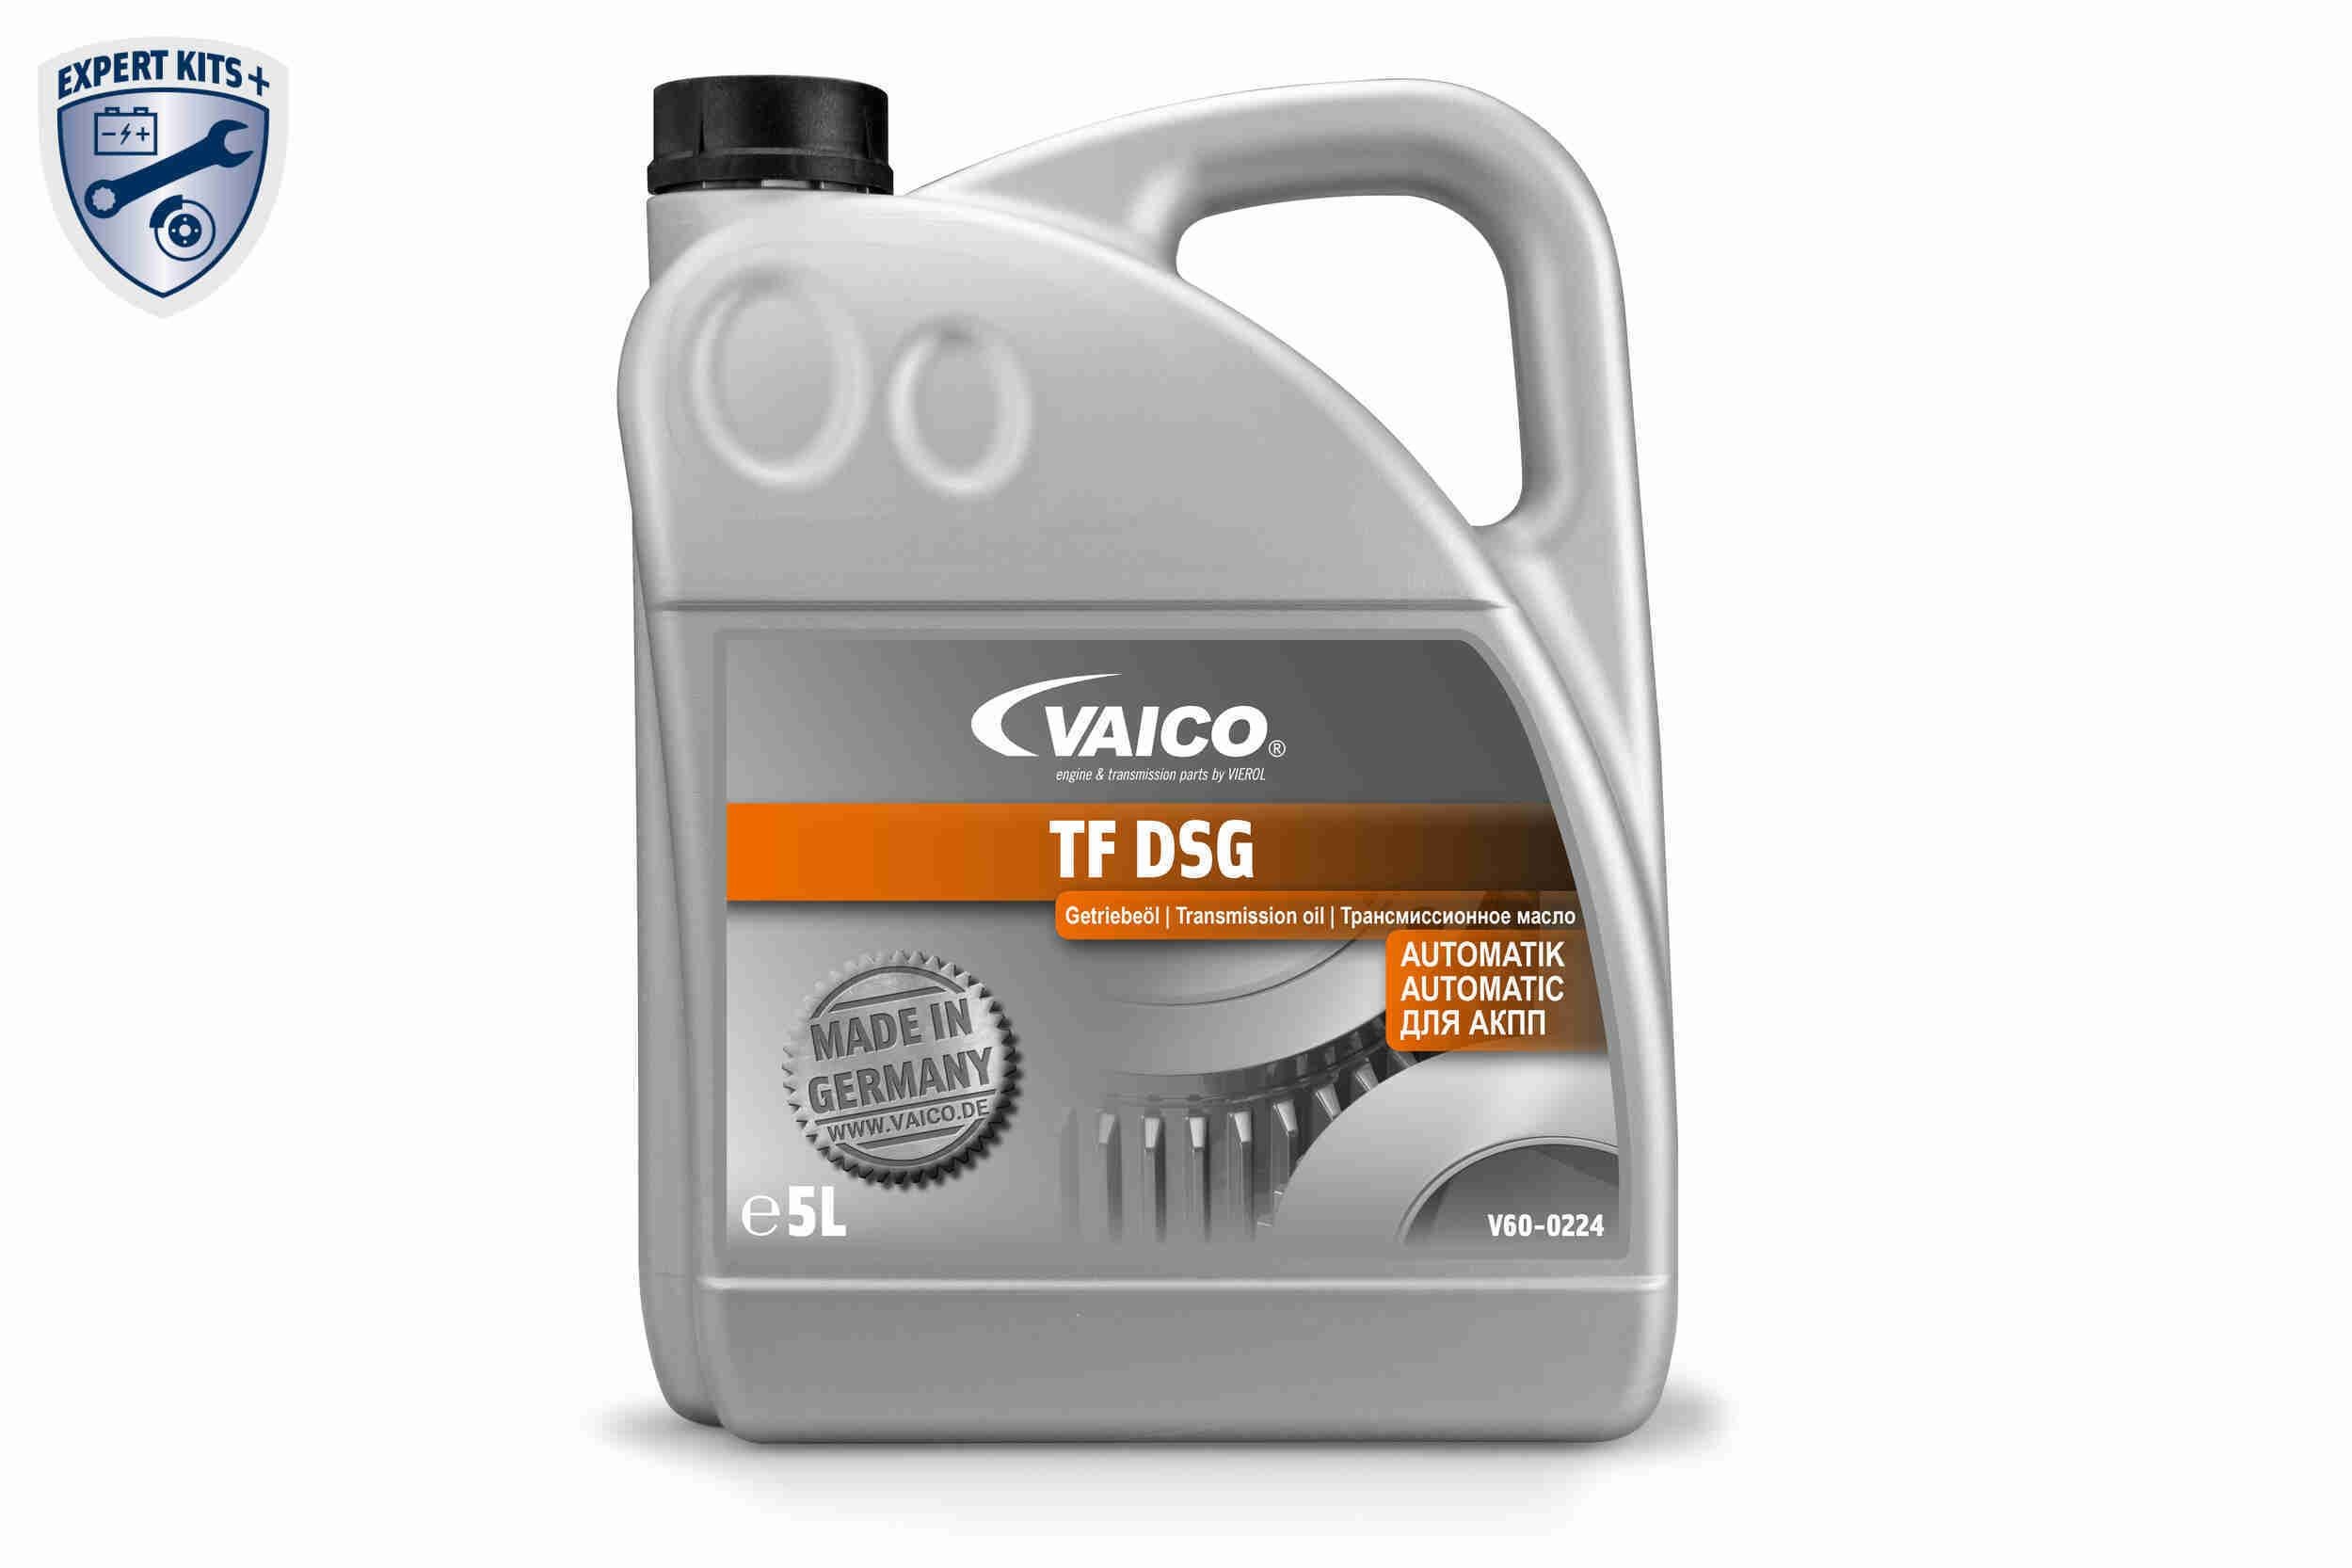 Great value for money - VAICO Automatic transmission fluid V60-0224